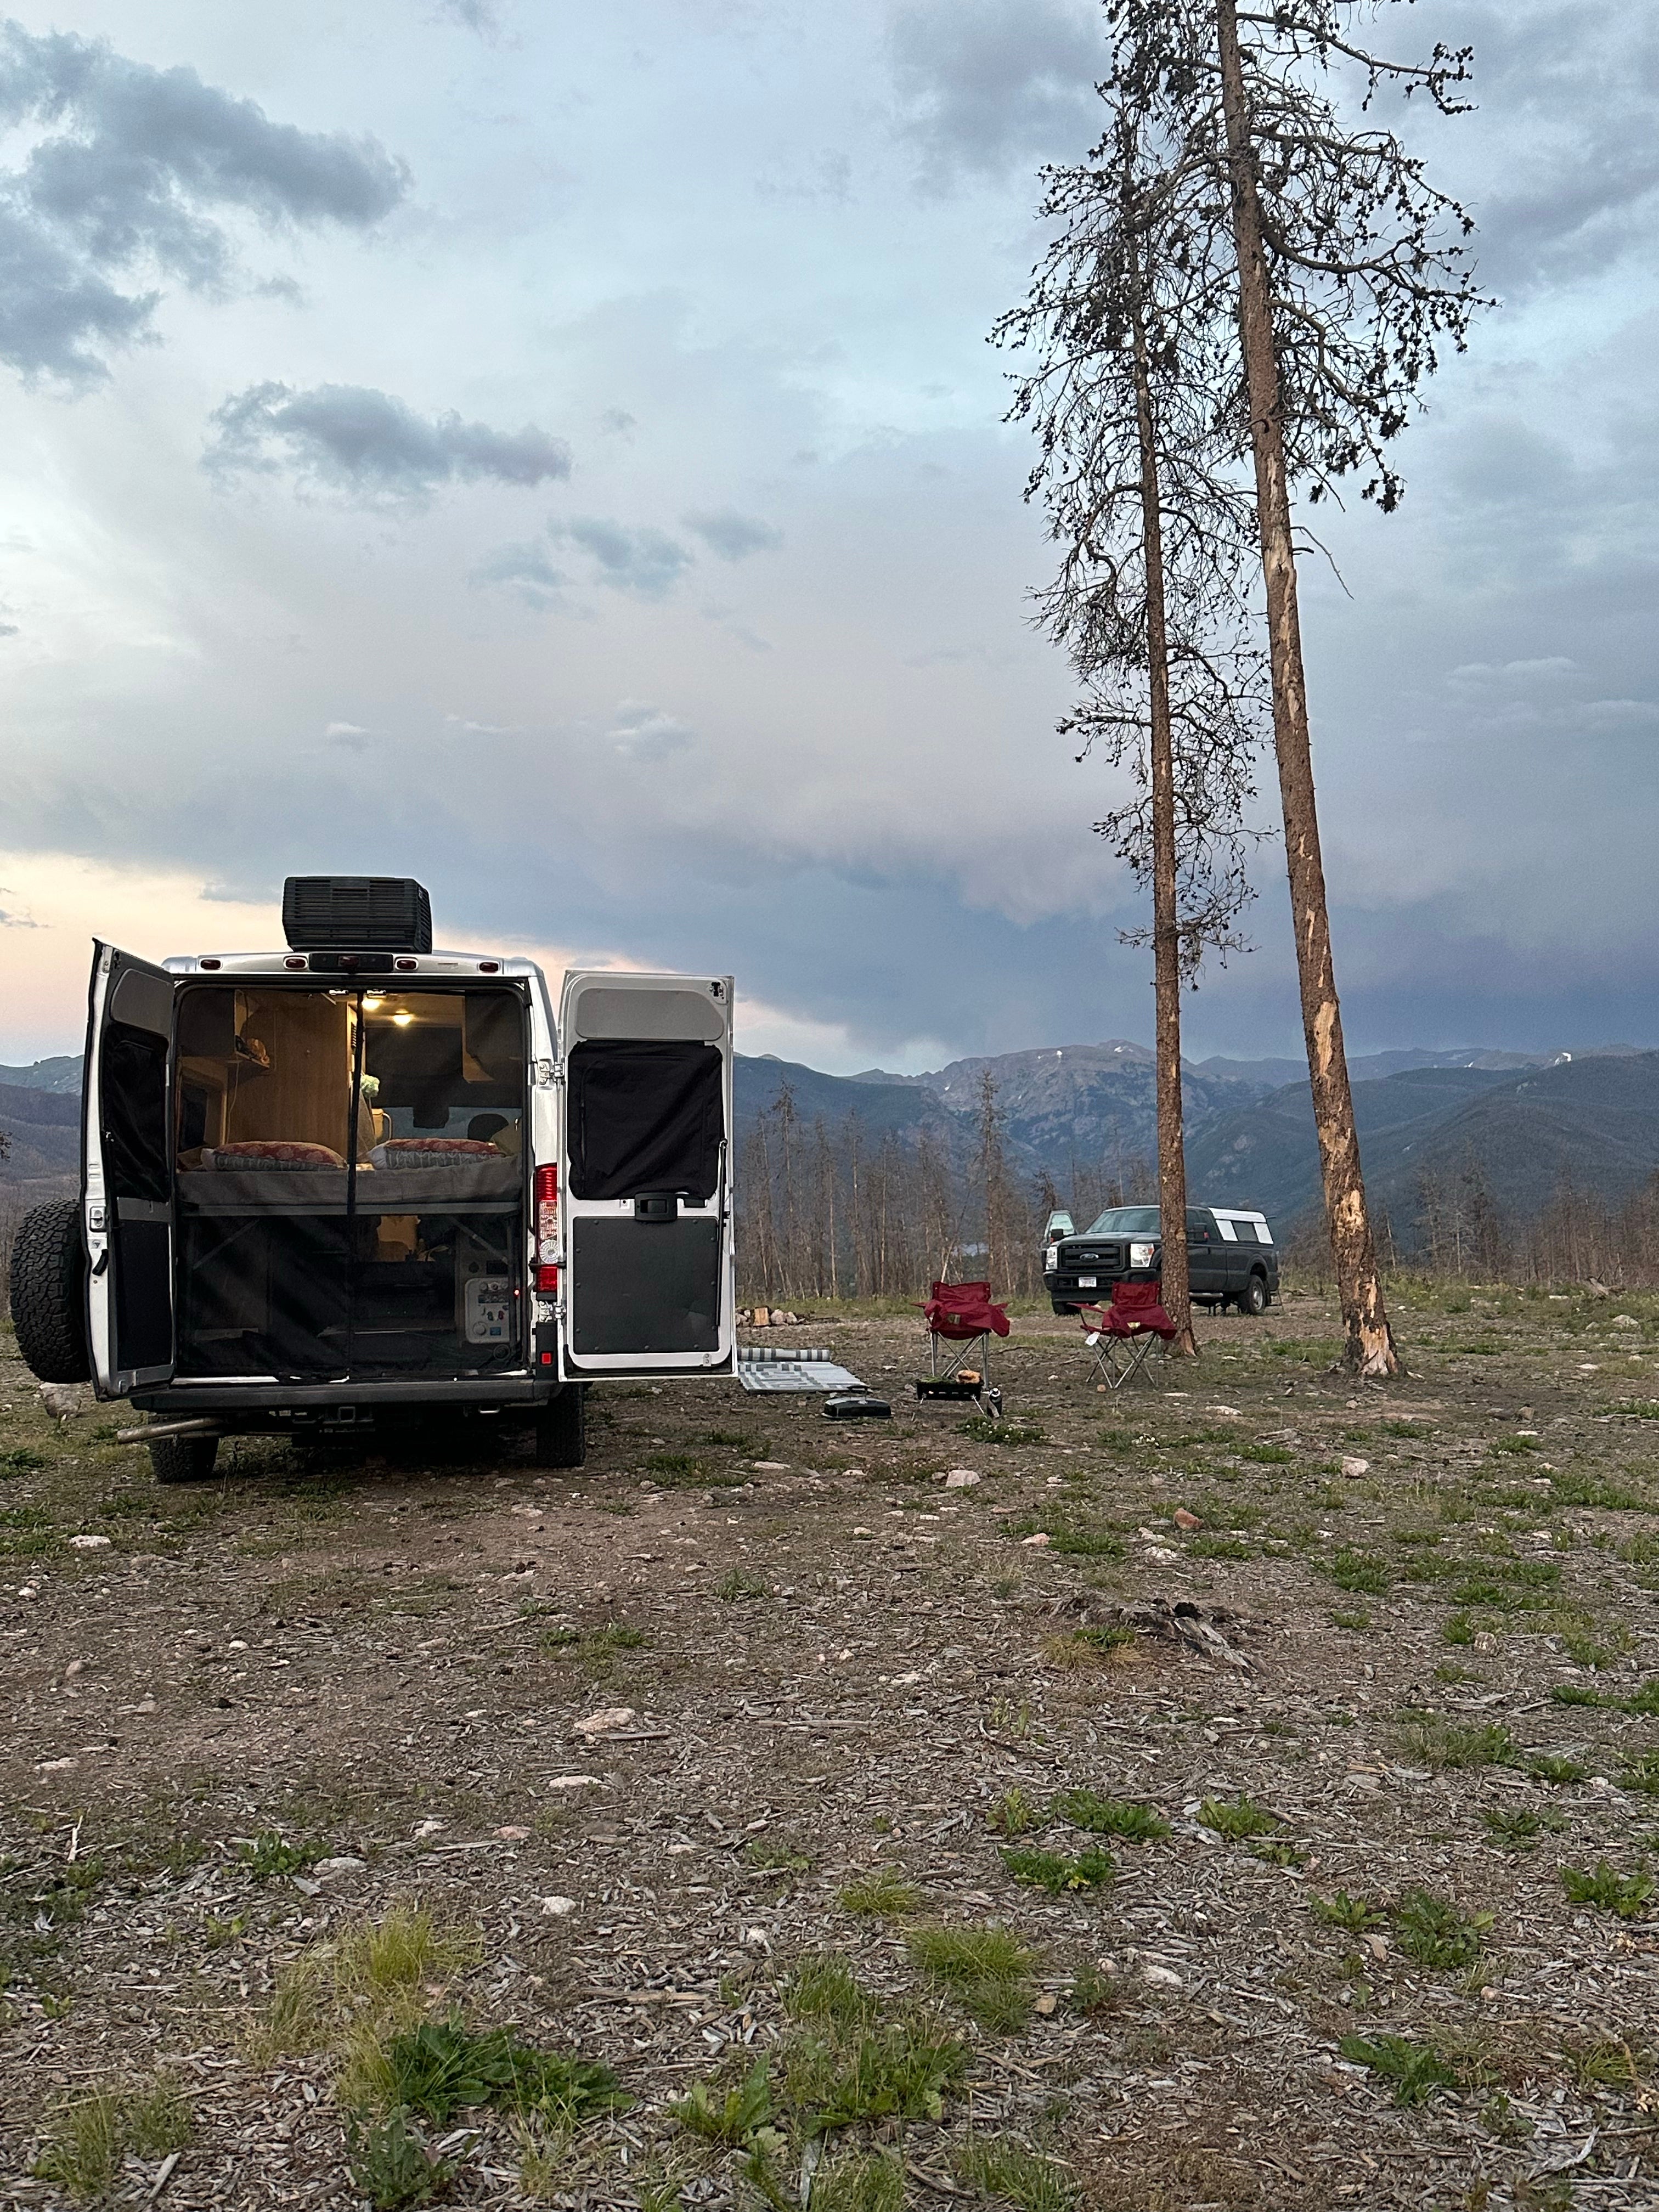 Camper submitted image from NFSR 120 Dispersed Site - Arapaho National Forest - 4